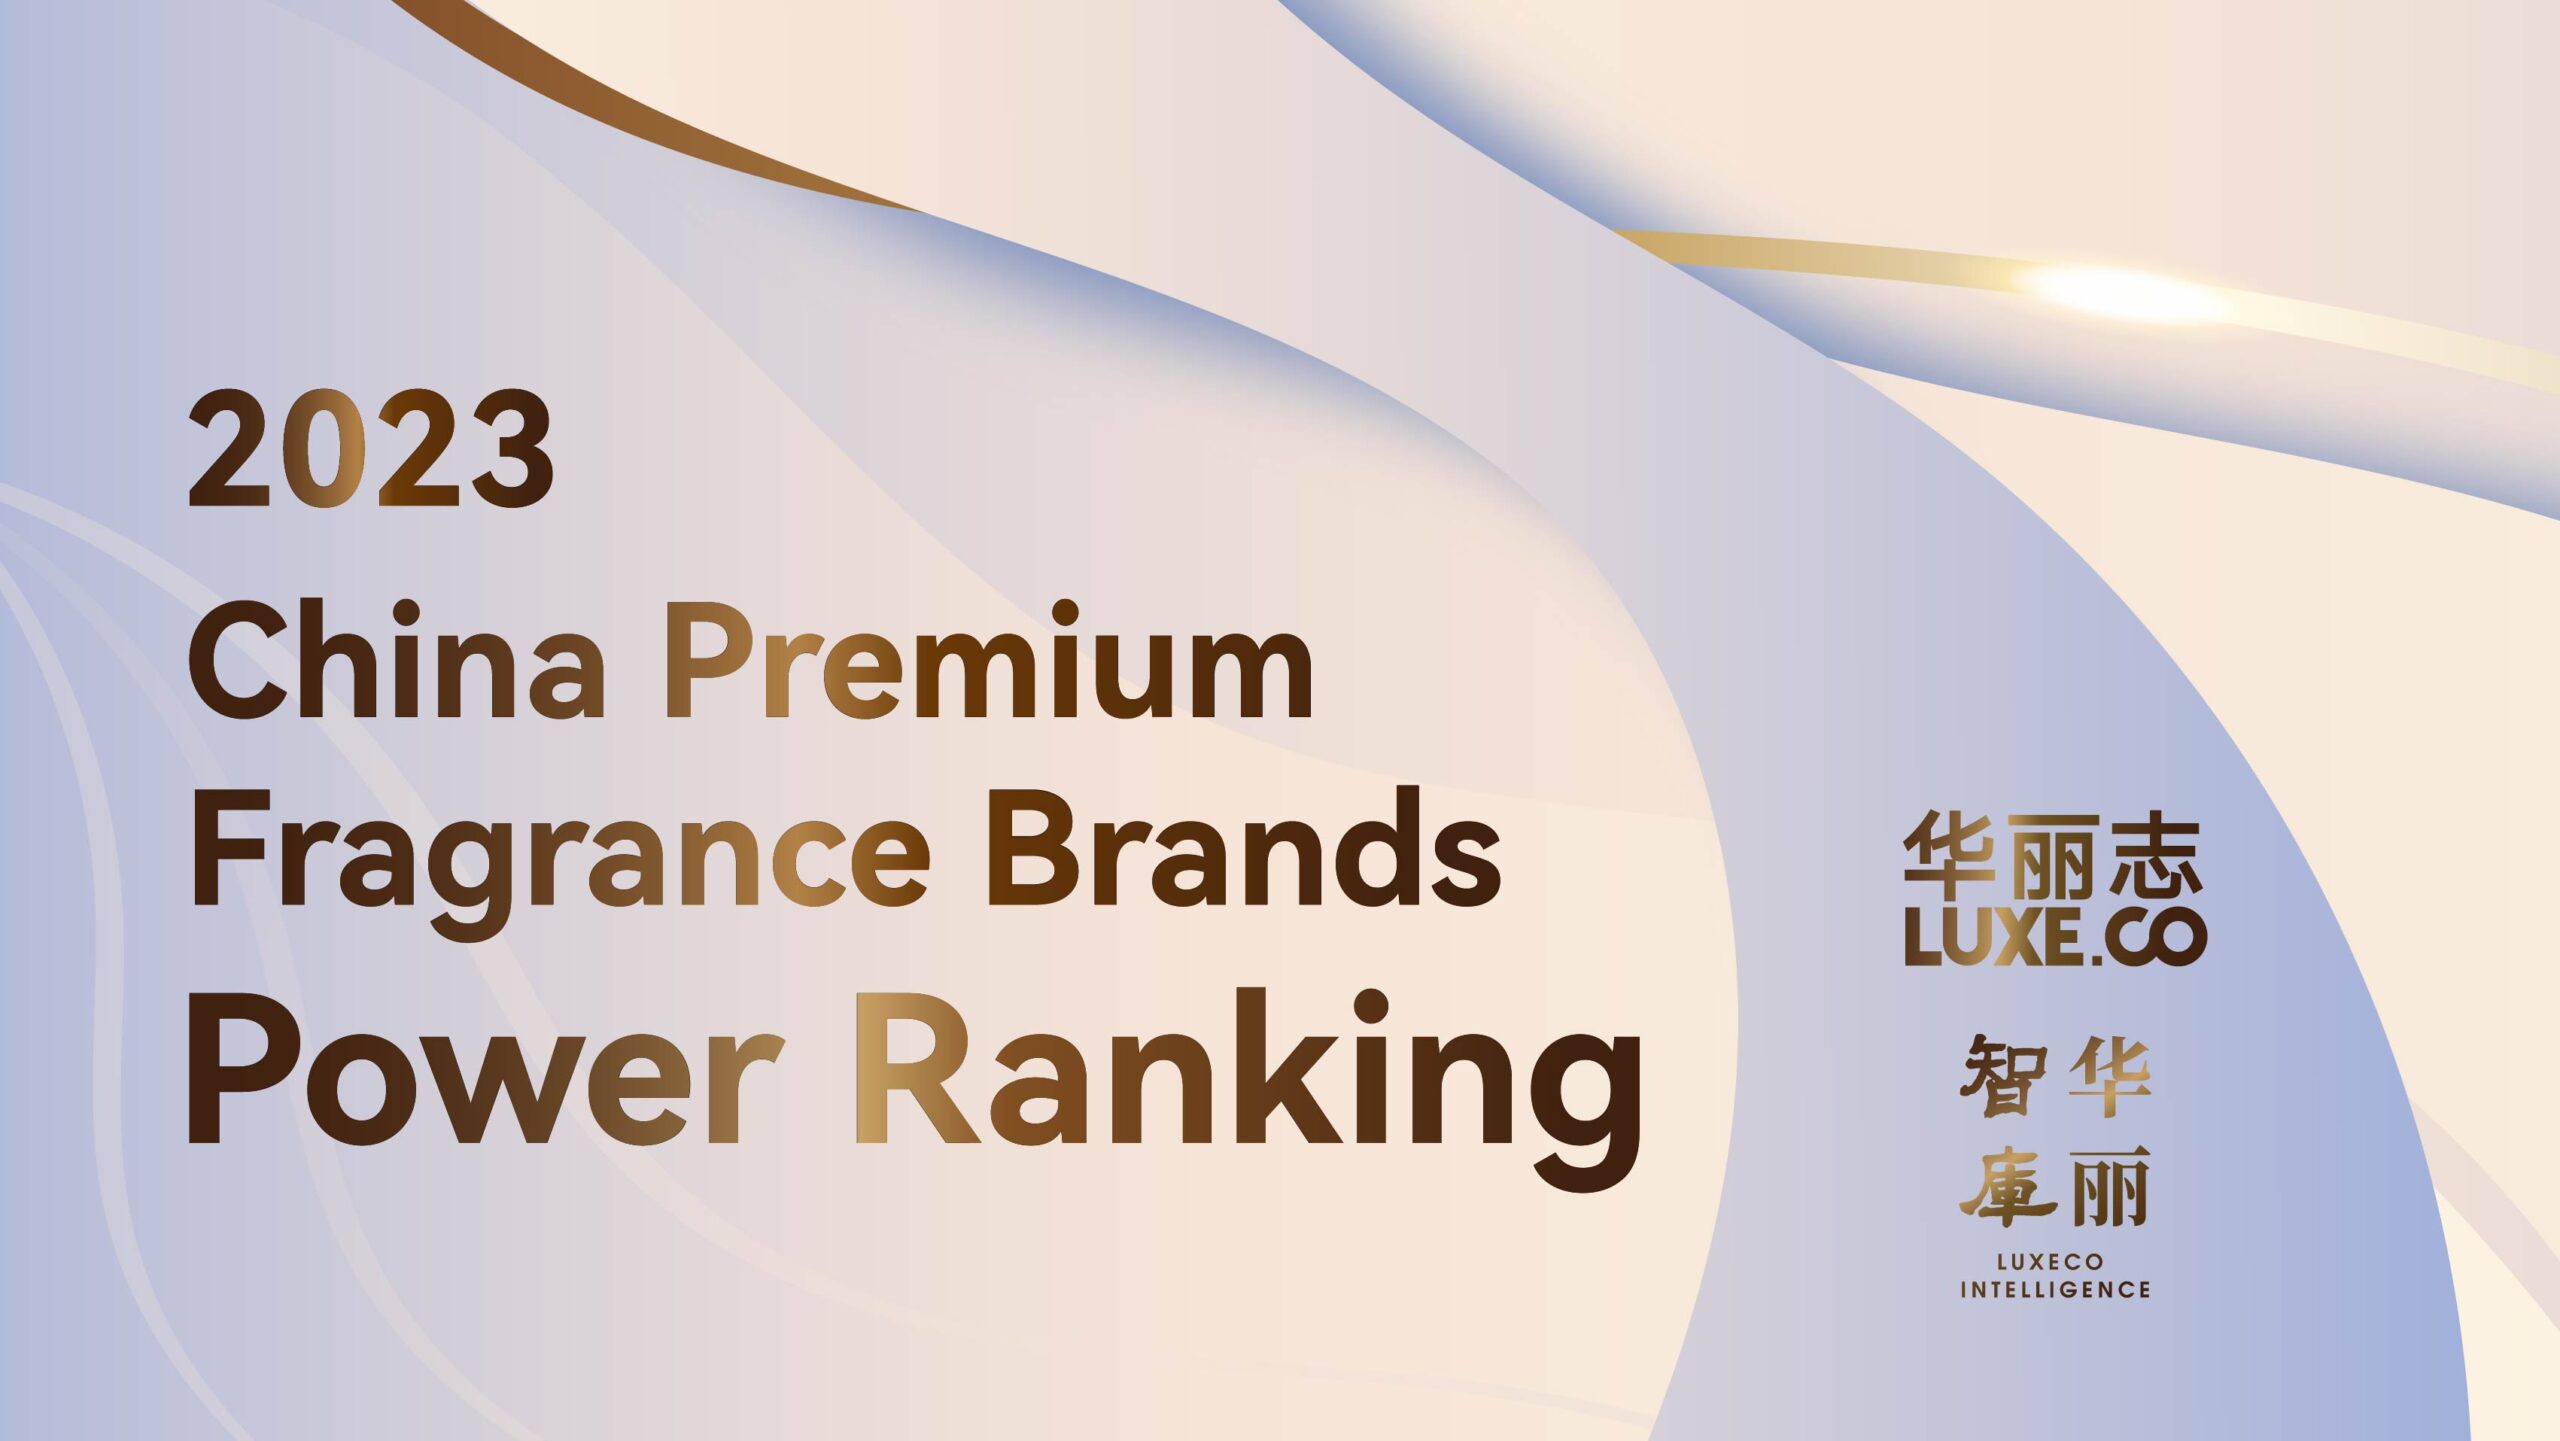 Exclusive | Luxe.CO Intelligence “China Premium Fragrance Brands Power Ranking” TOP 20 List Revealed